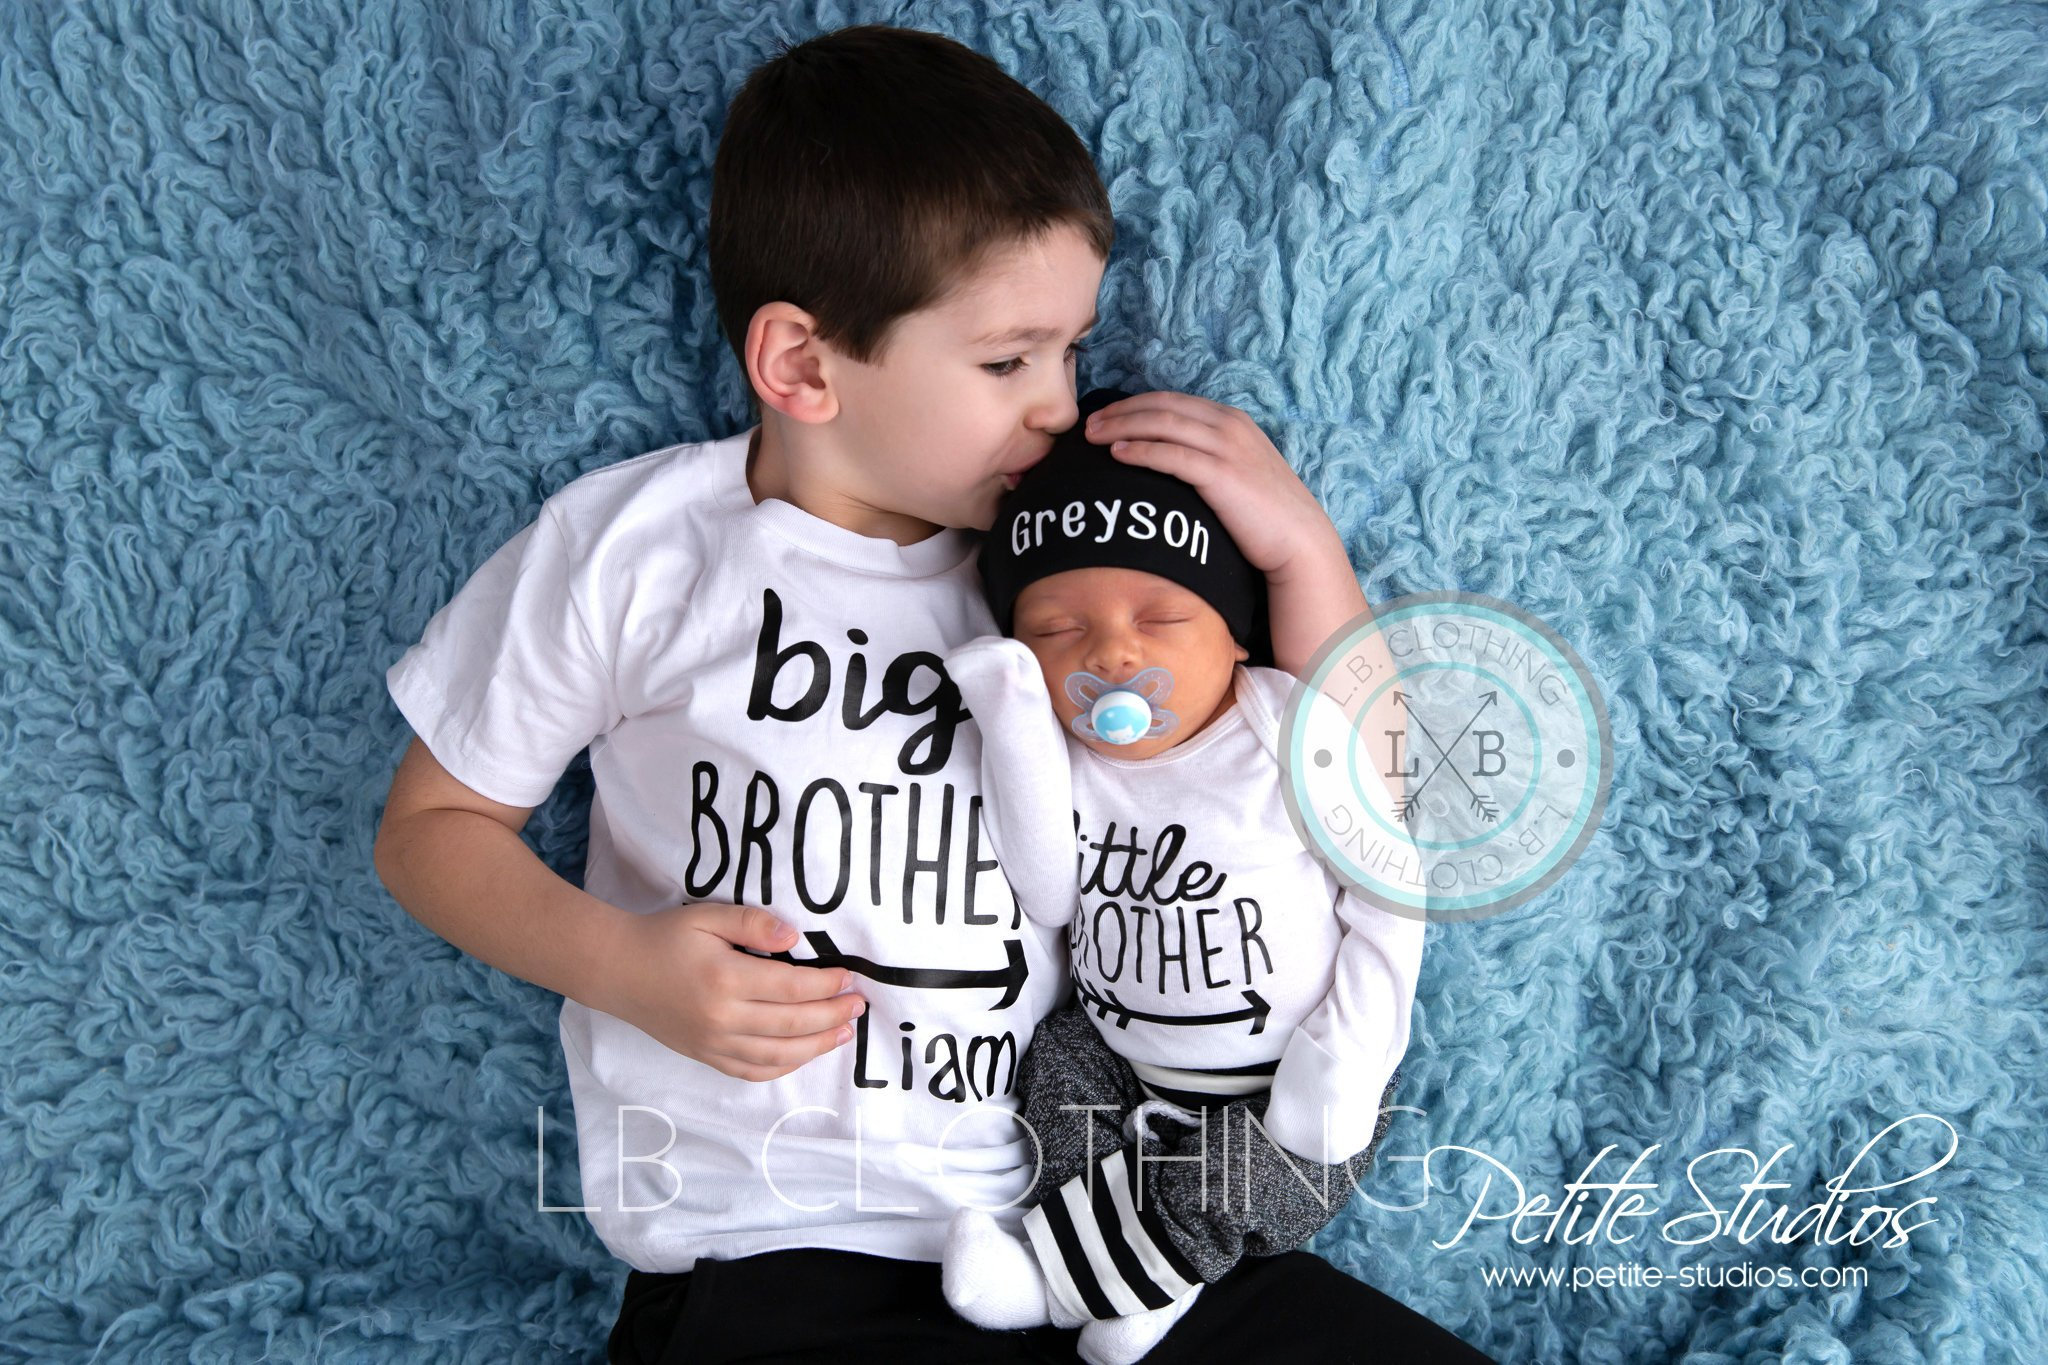 big brother little brother outfits